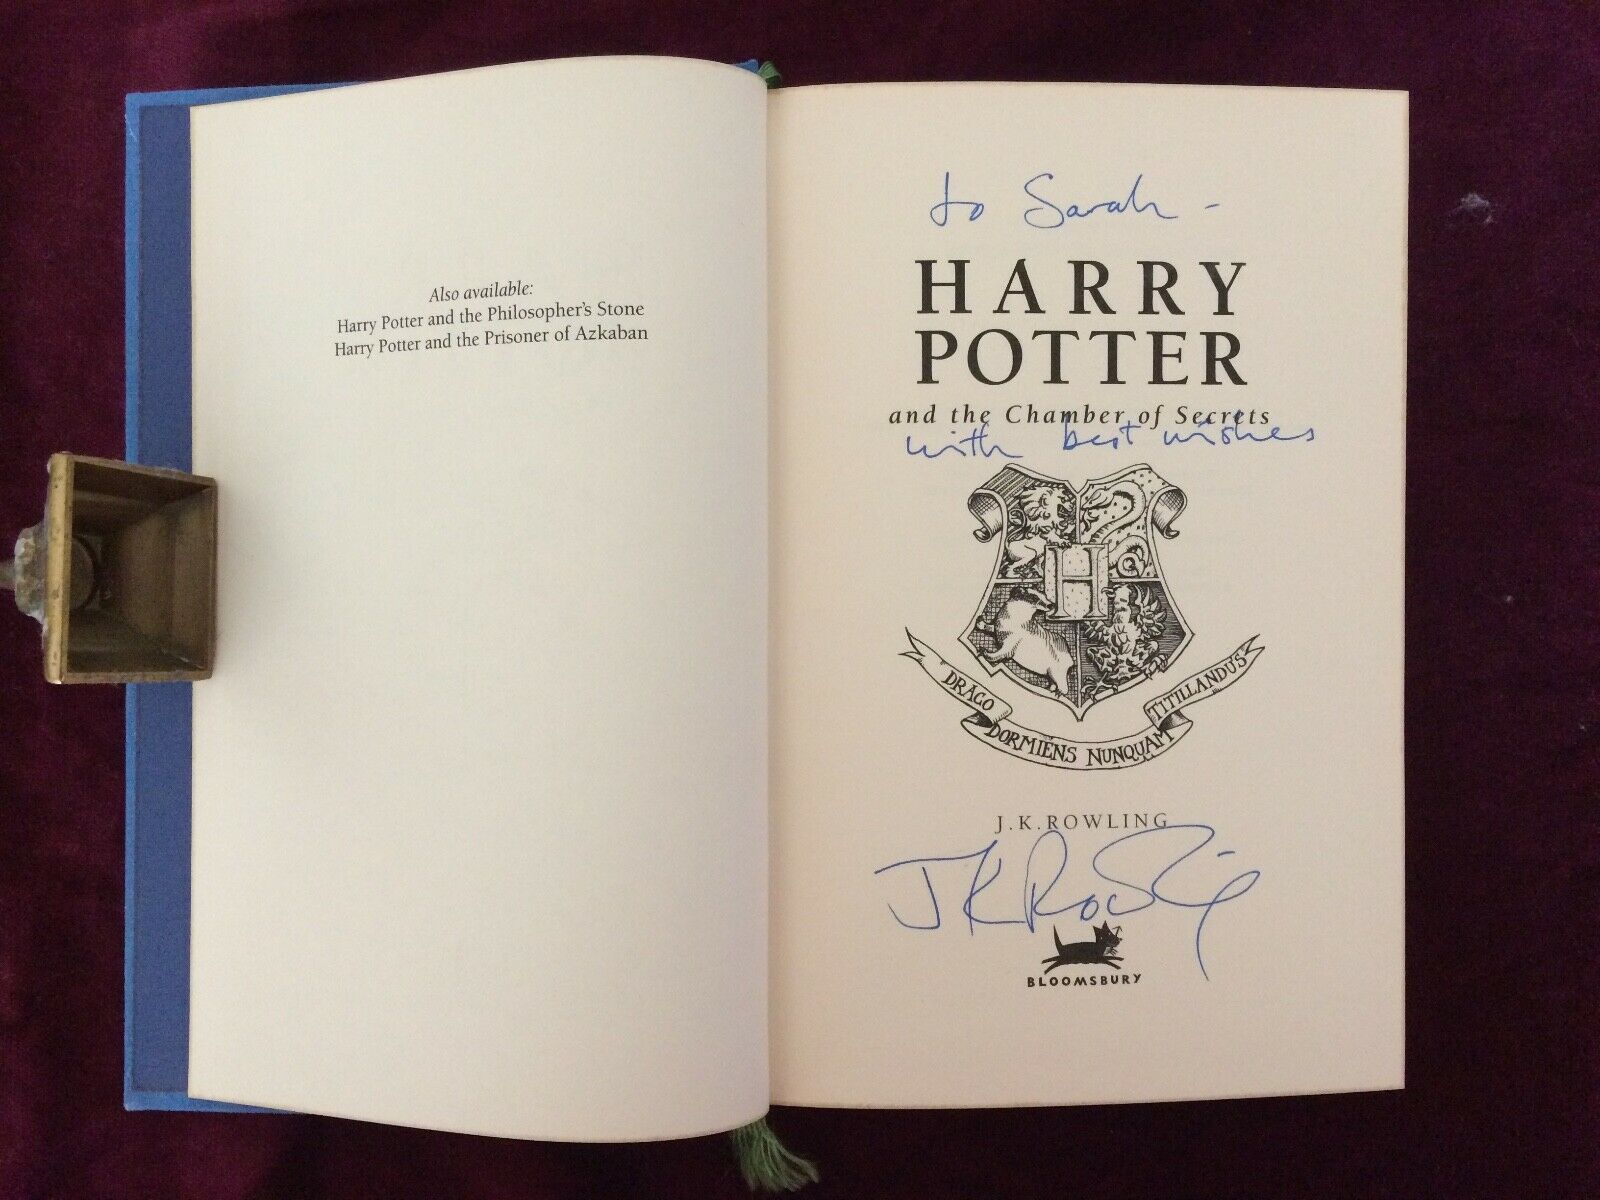 J.K. Rowling signature forgery found inside a Bloomsbury Deluxe edition of Harry Potter and the Chamber of Secrets on eBay. Sold by mColes78.